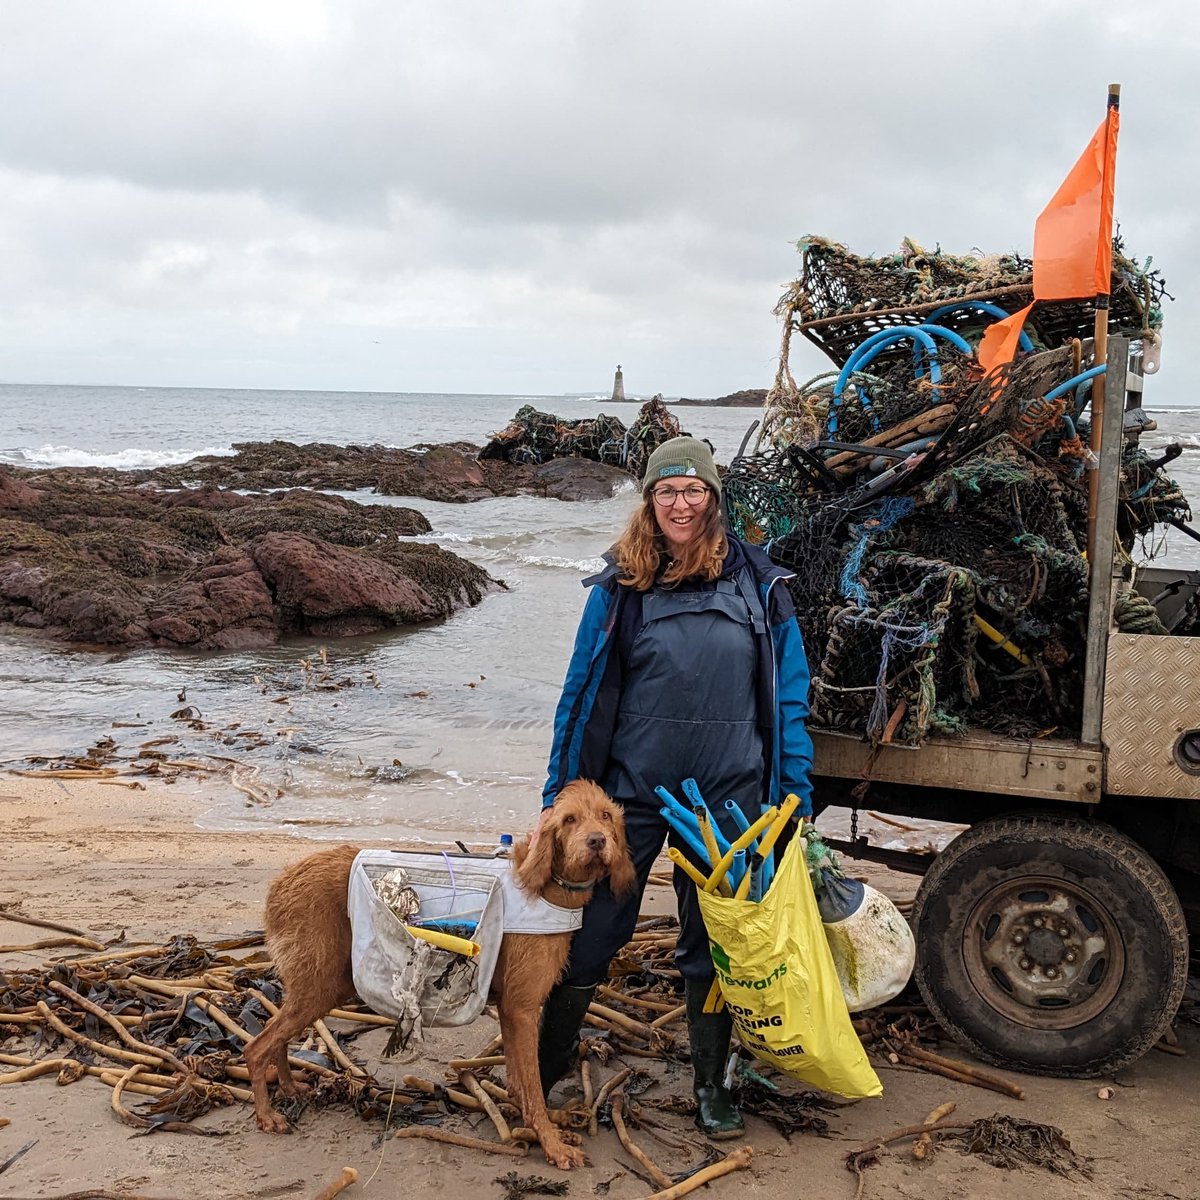 The post storm Babet clean up continues. Chatted with some local fishermen to see if we might be able to assist them in salvaging some of the many creels that washed up in the huge waves. Finding all sorts washed up, from huge items to microplastics & so many nurdles!